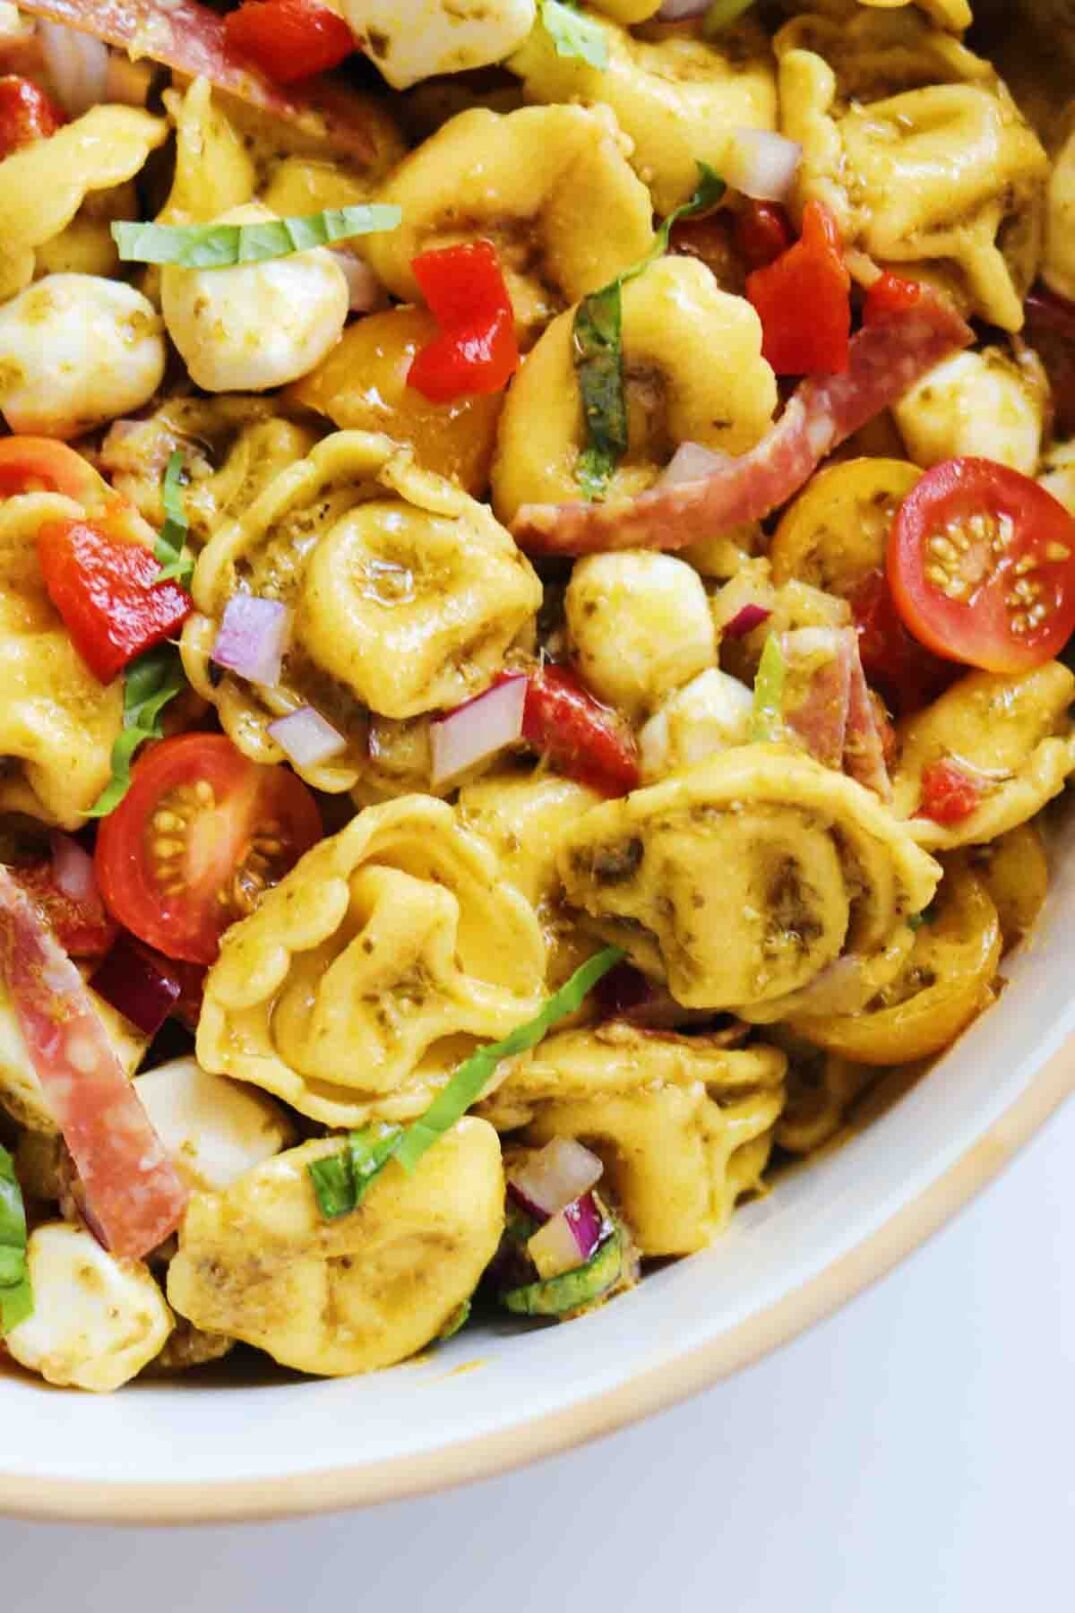 the side of a big white bowl full of colorful chopped veggies, cheese tortellini and. pesto vinaigrette.